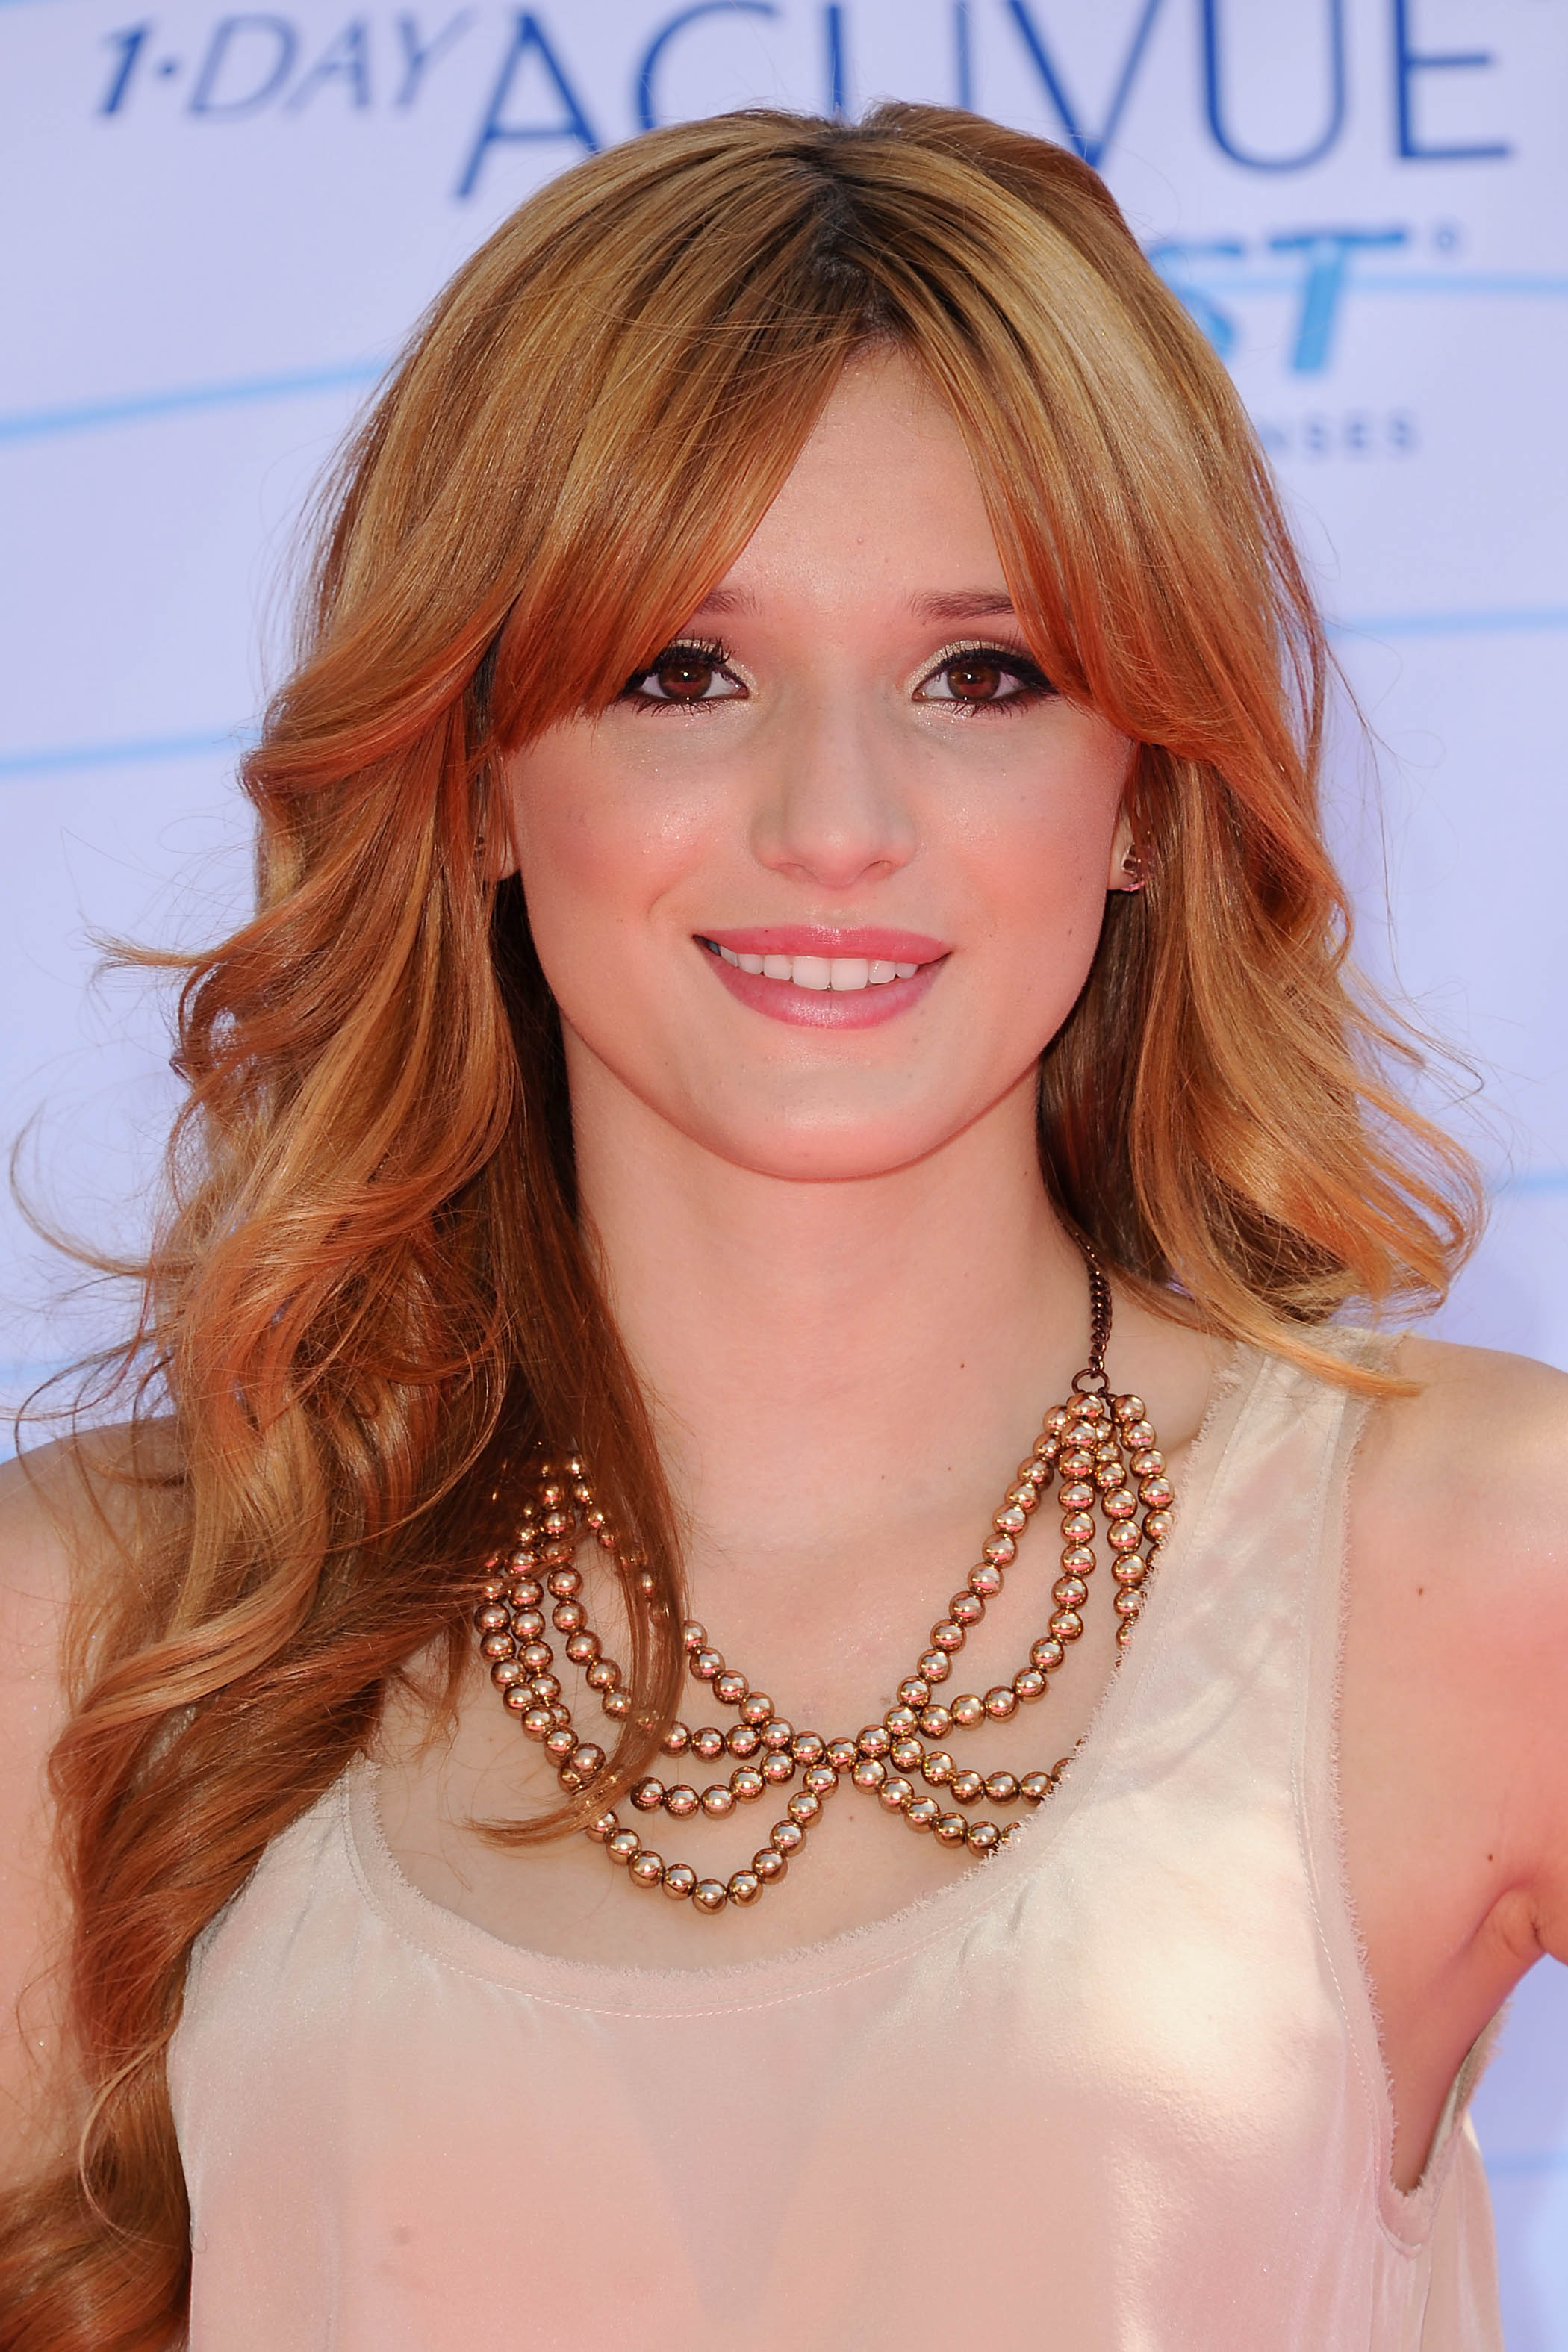 Previous Gallery of Bella Thorne. 